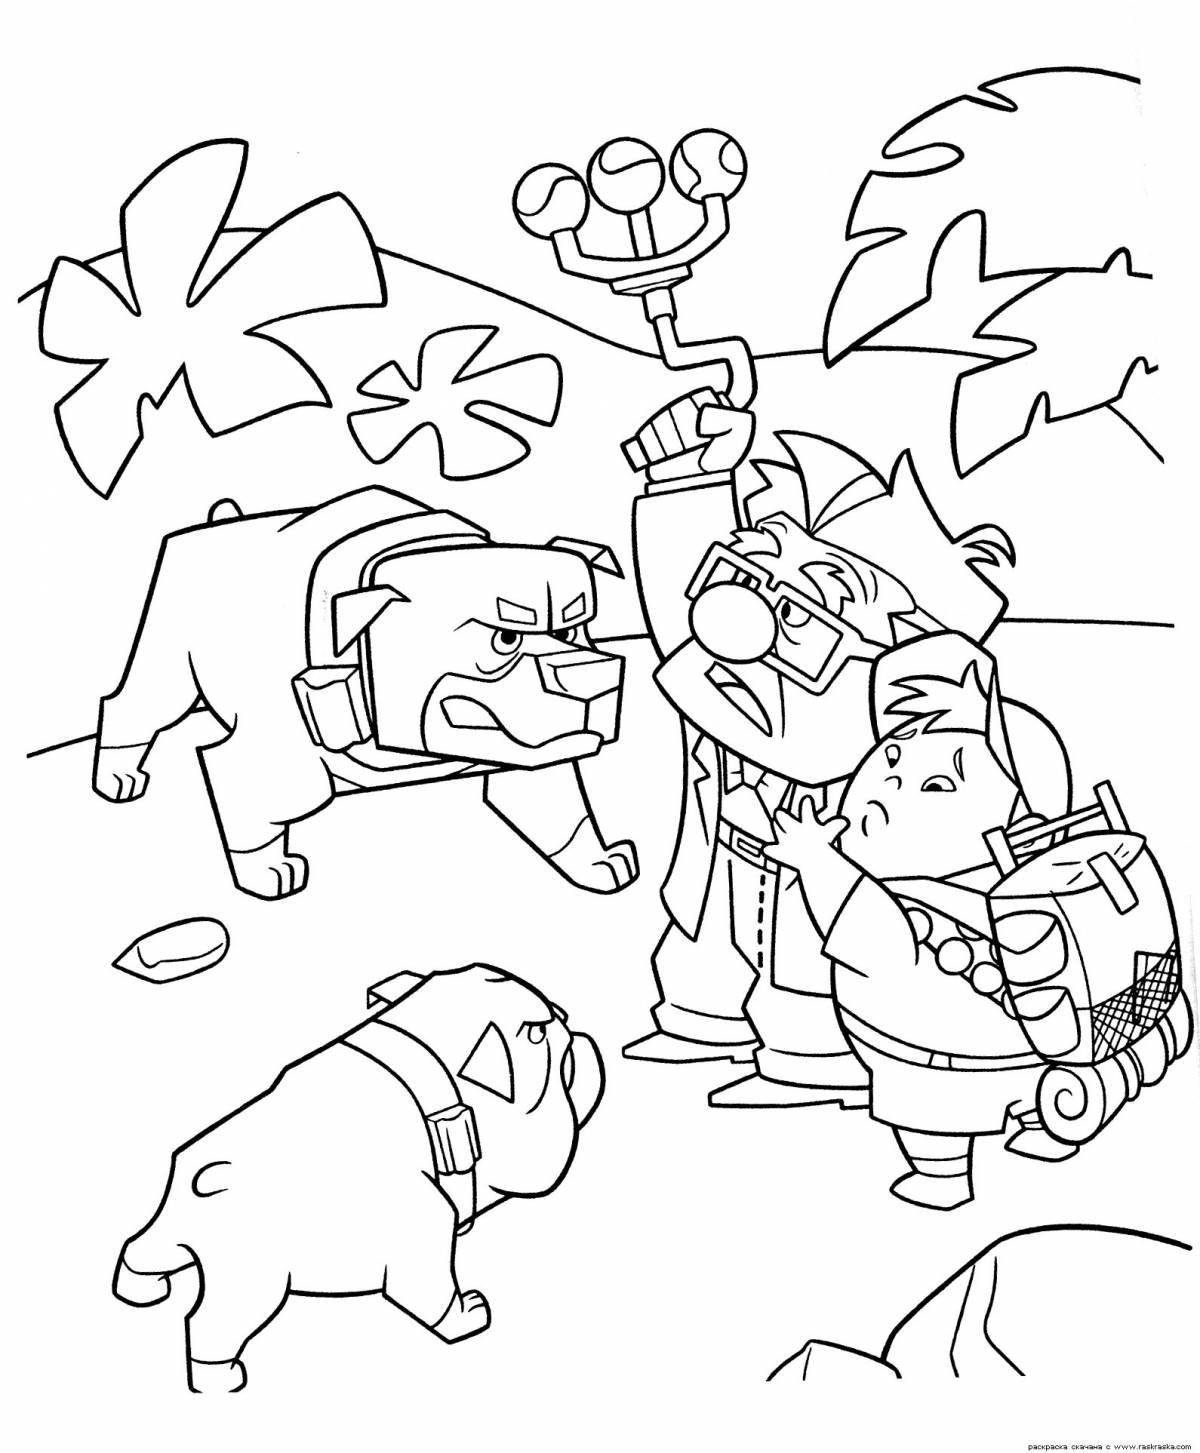 Animated coloring page up